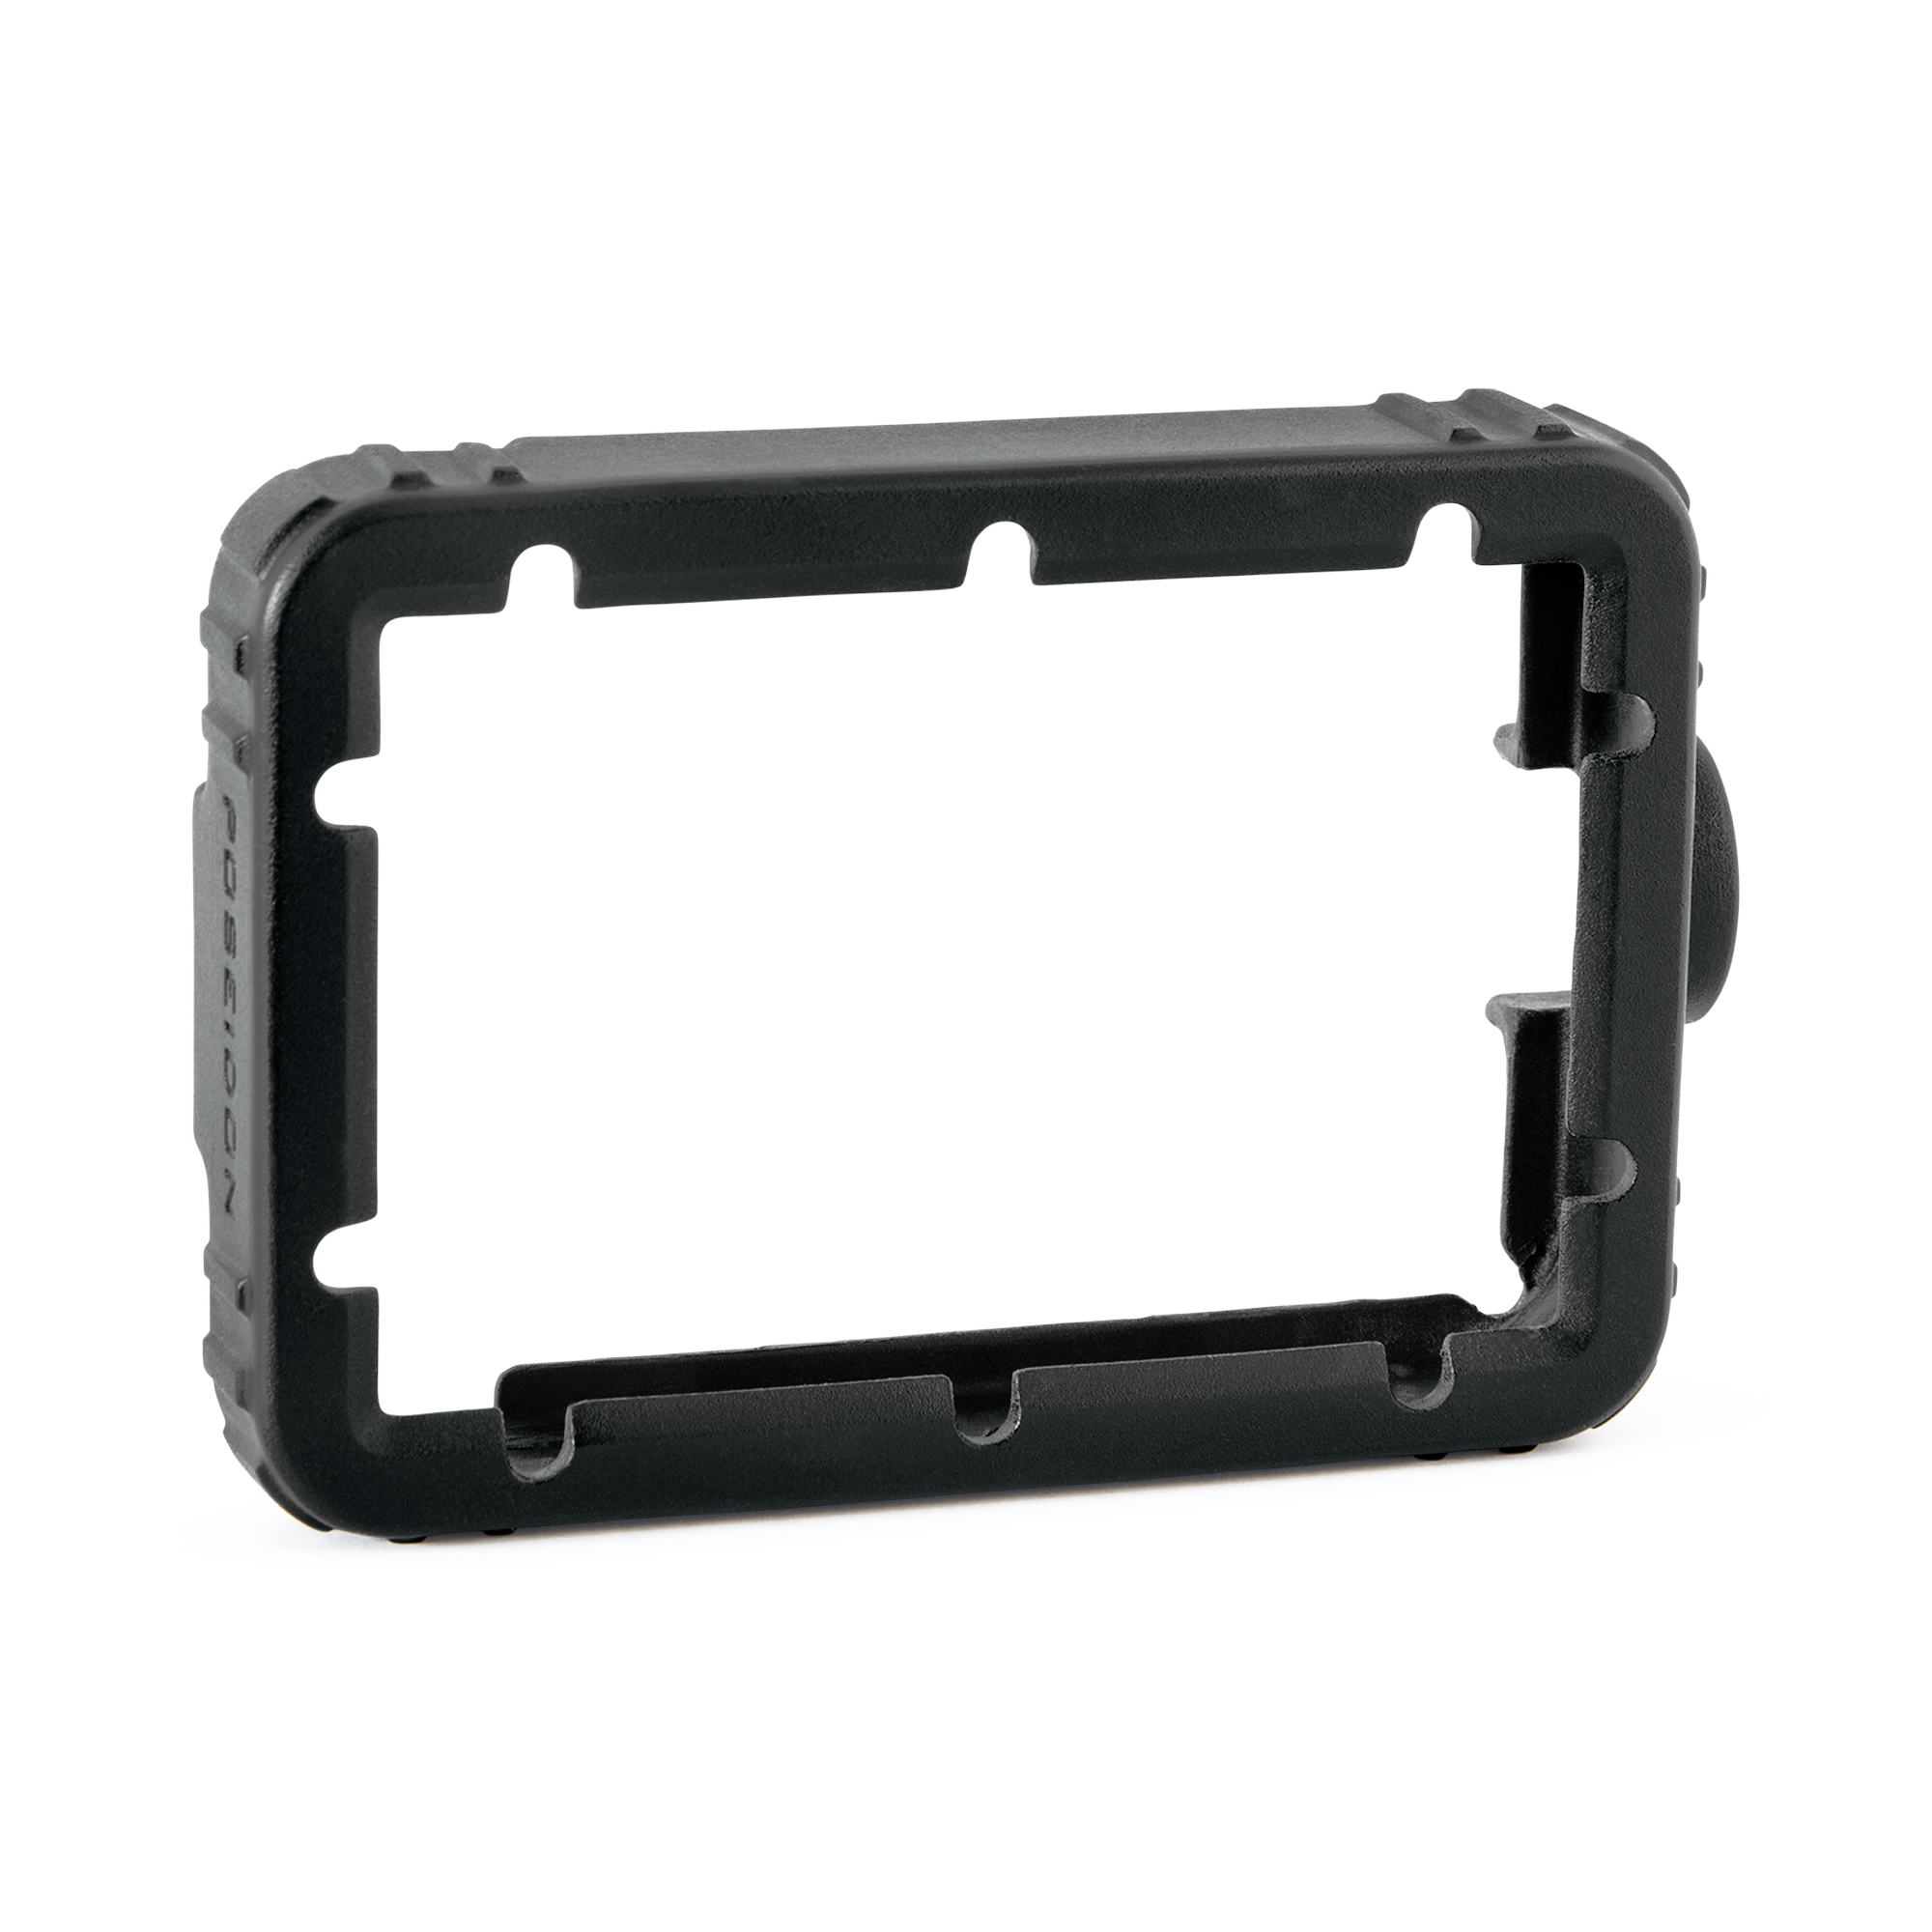 M28 Protective Cover Black